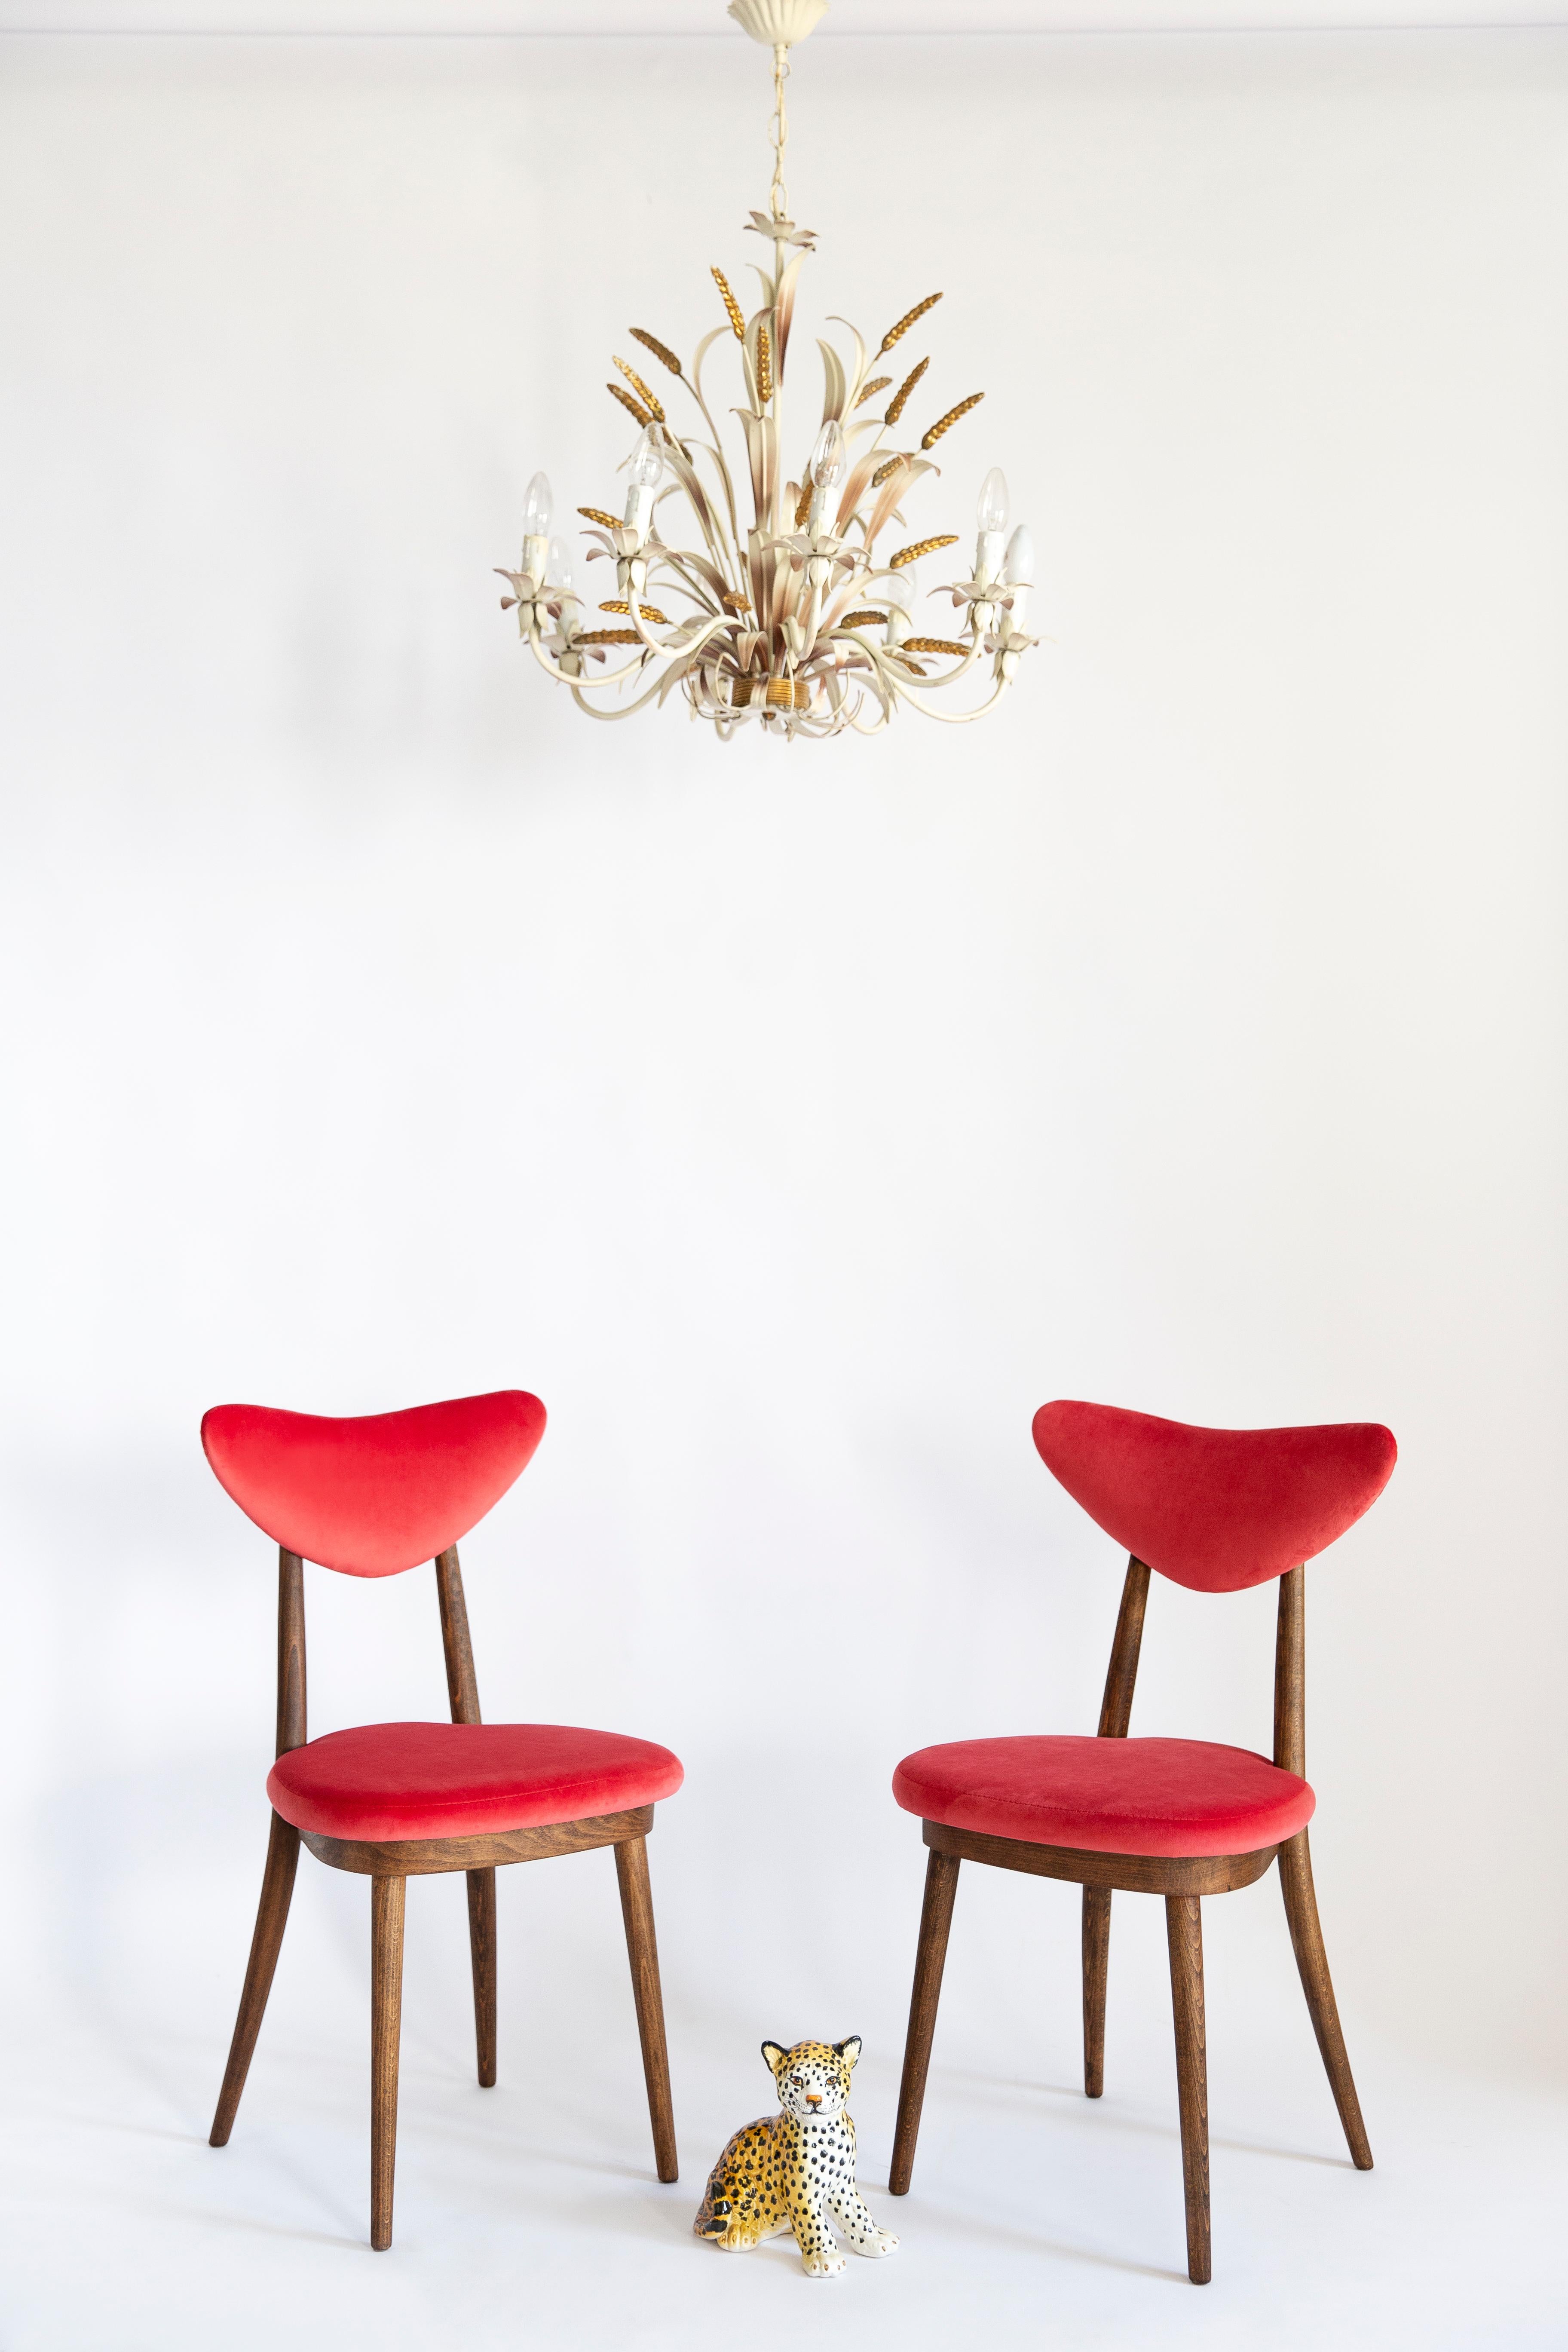 Pair of Red Heart Chairs, Poland, 1960s For Sale 8